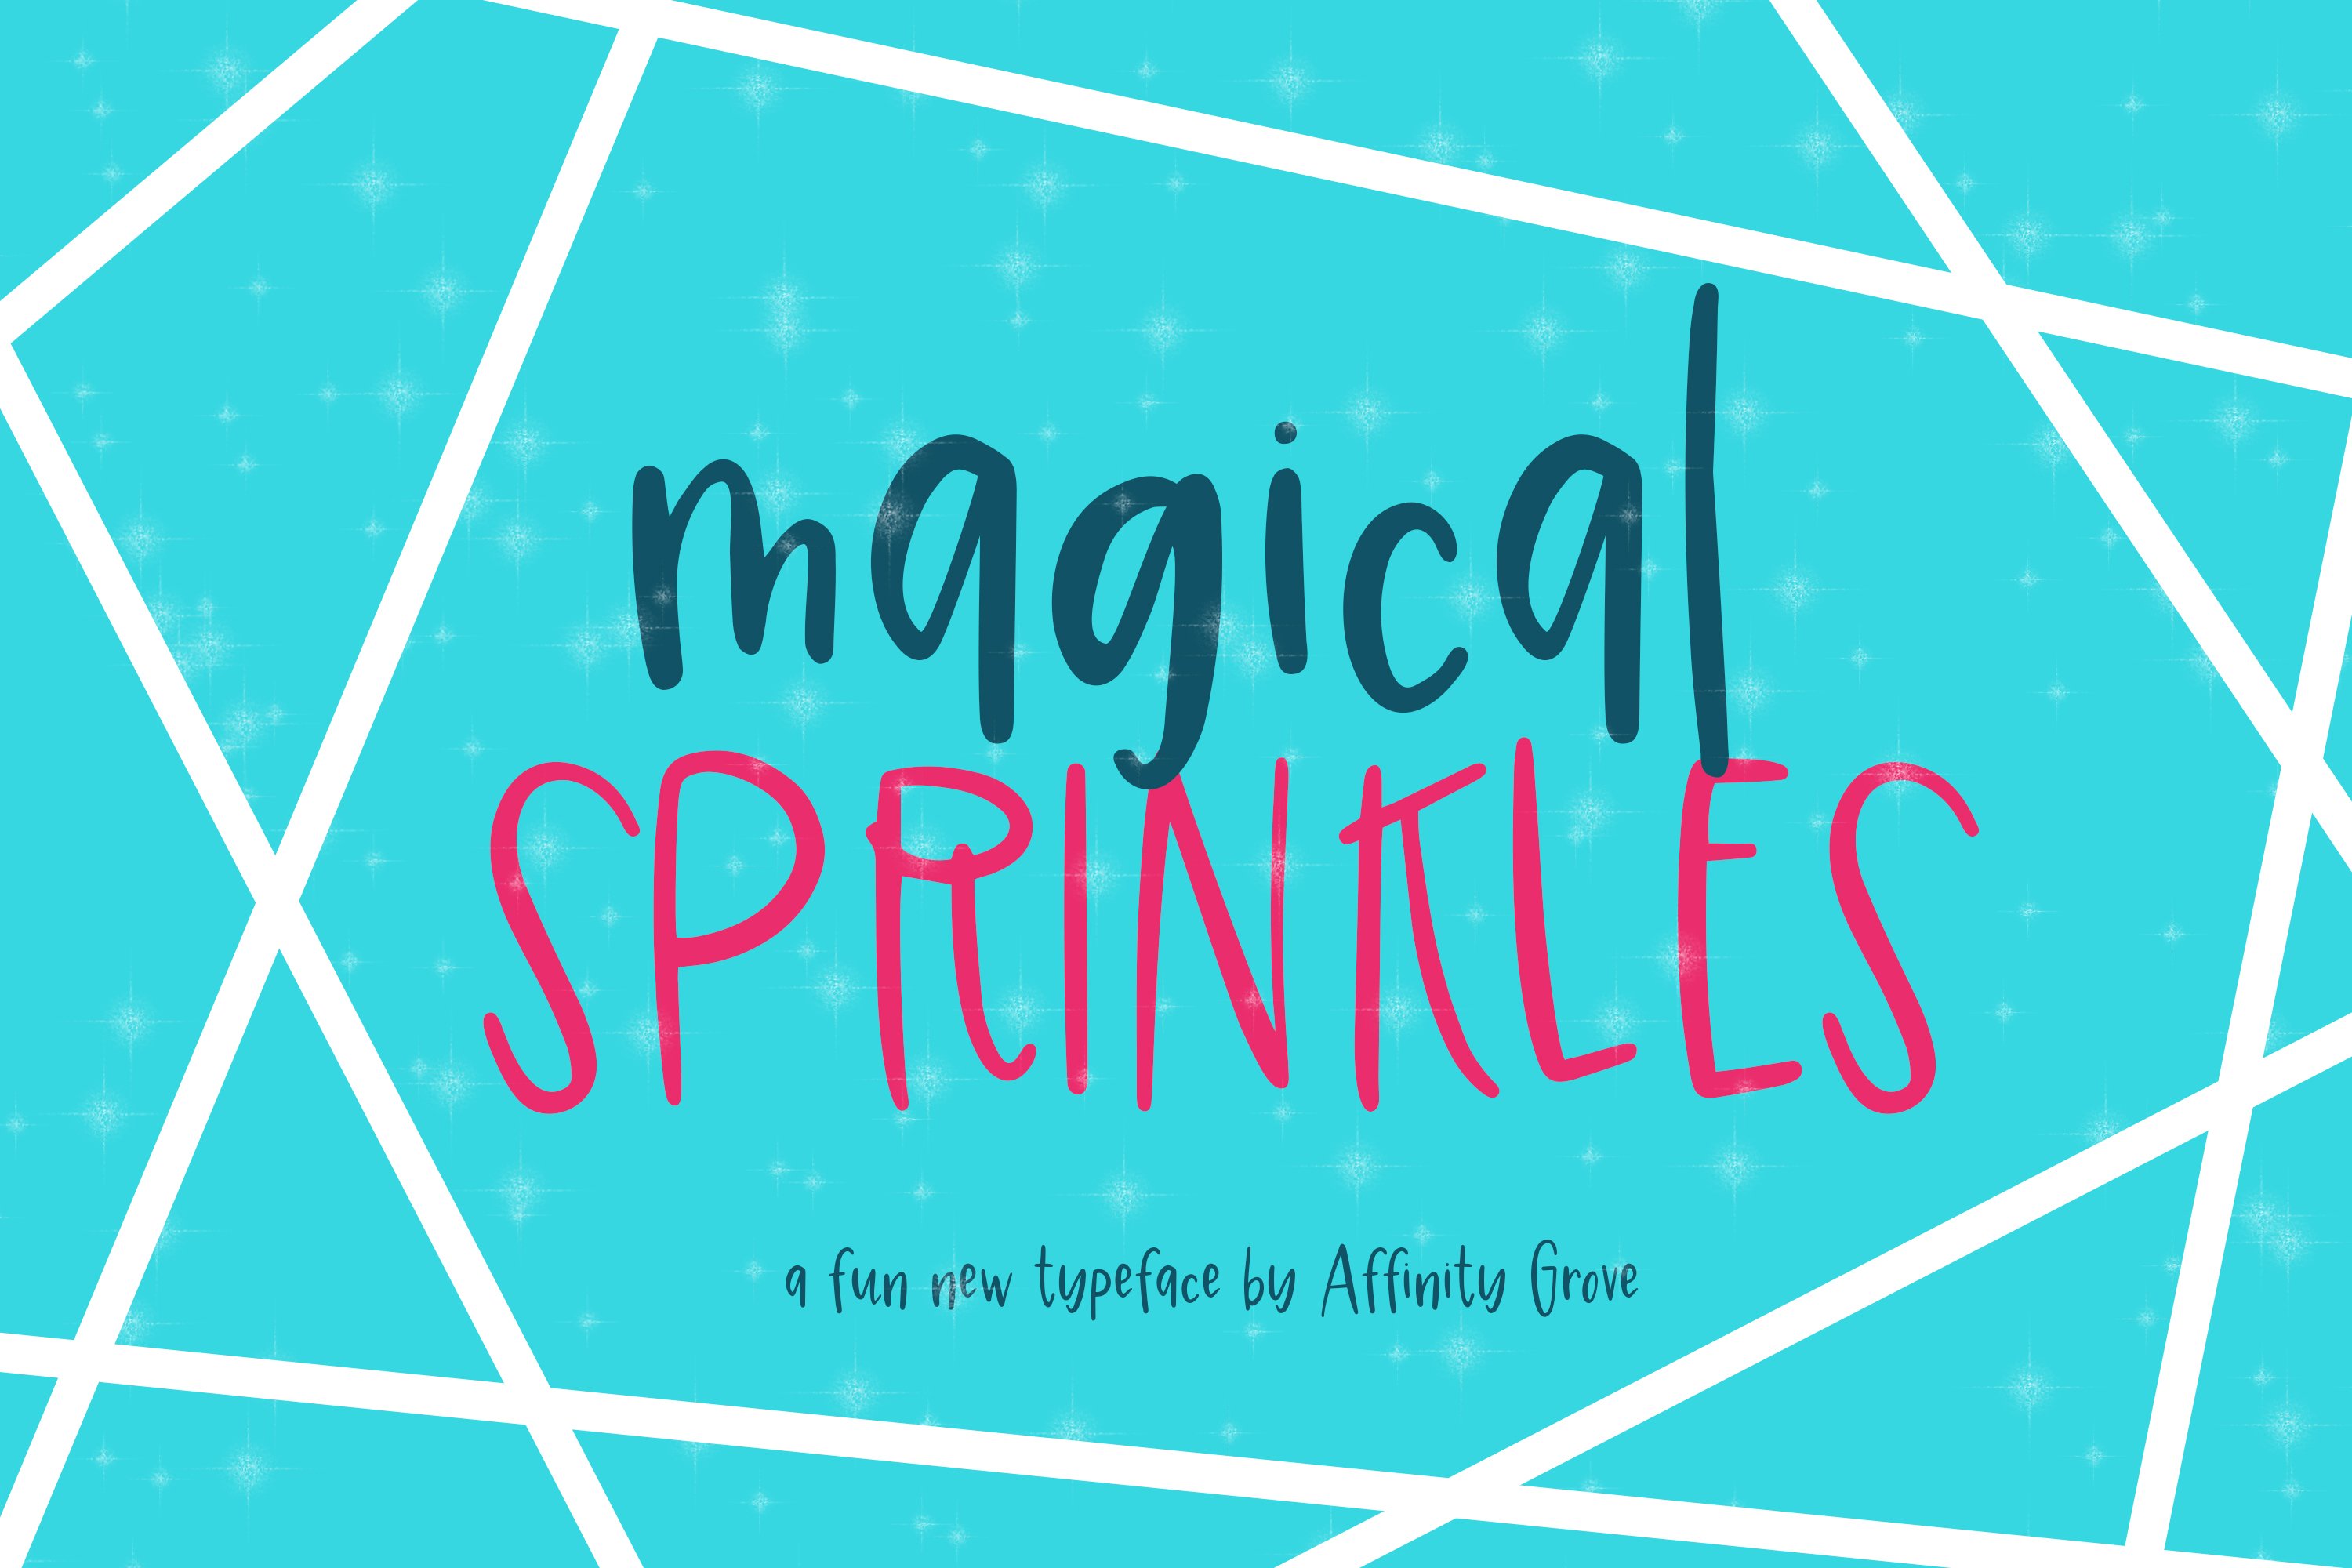 Magical Sprinkles cover image.